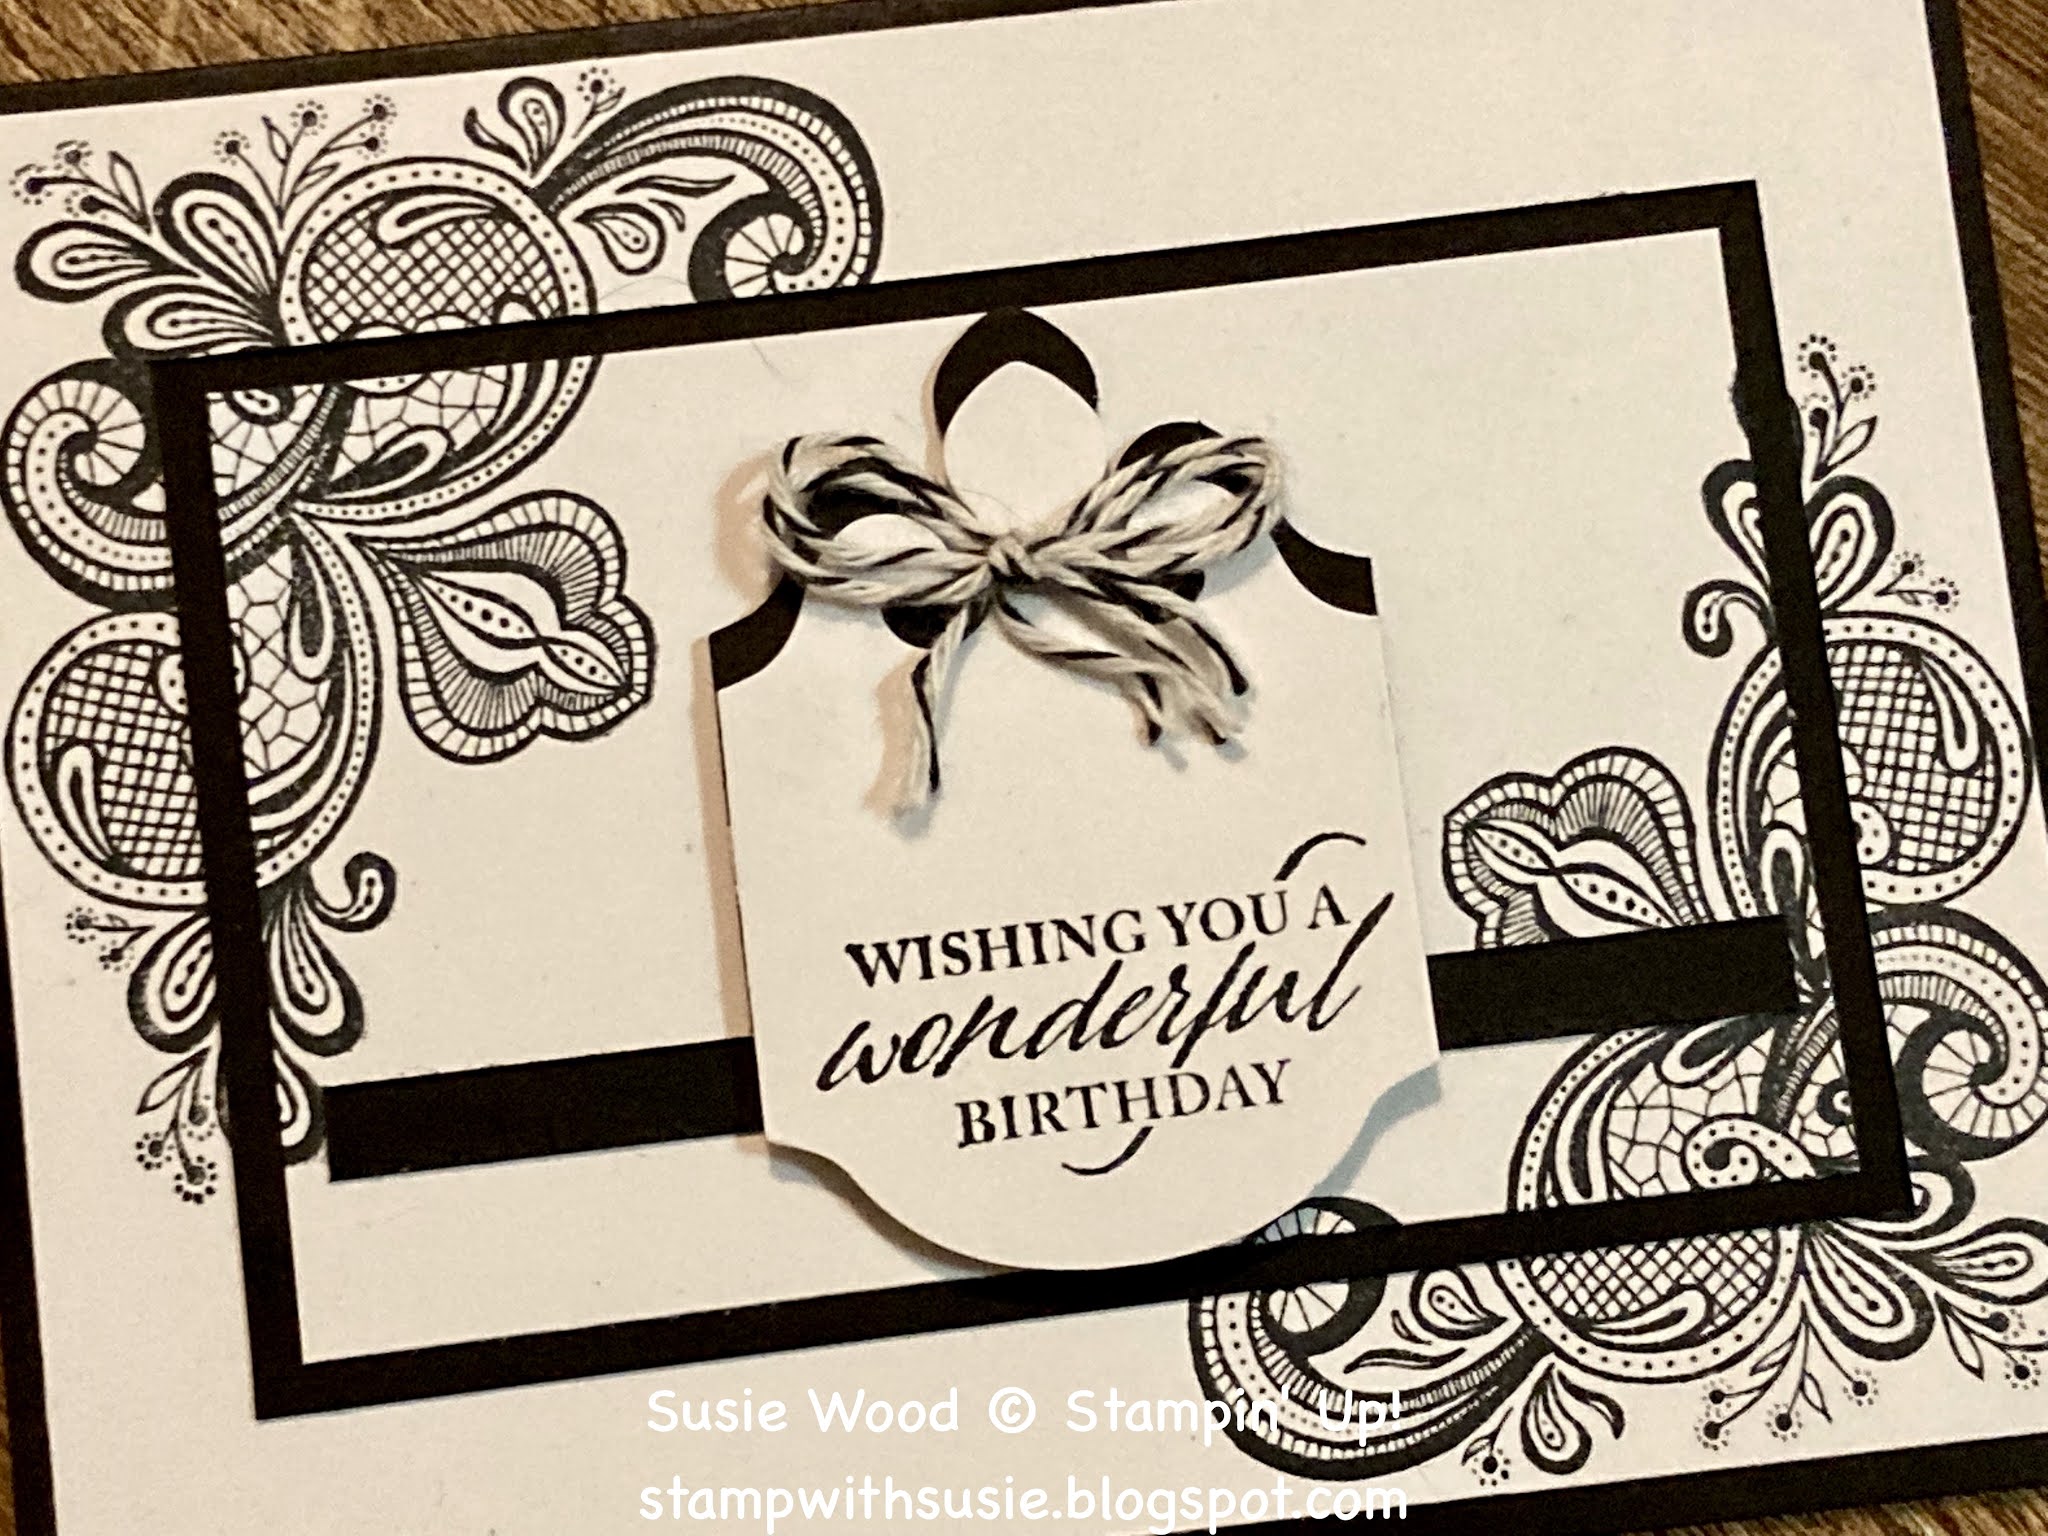 Stampin' Up! Lazy Days Welcome Card Sneak Peek! – Inky Bee Stampers